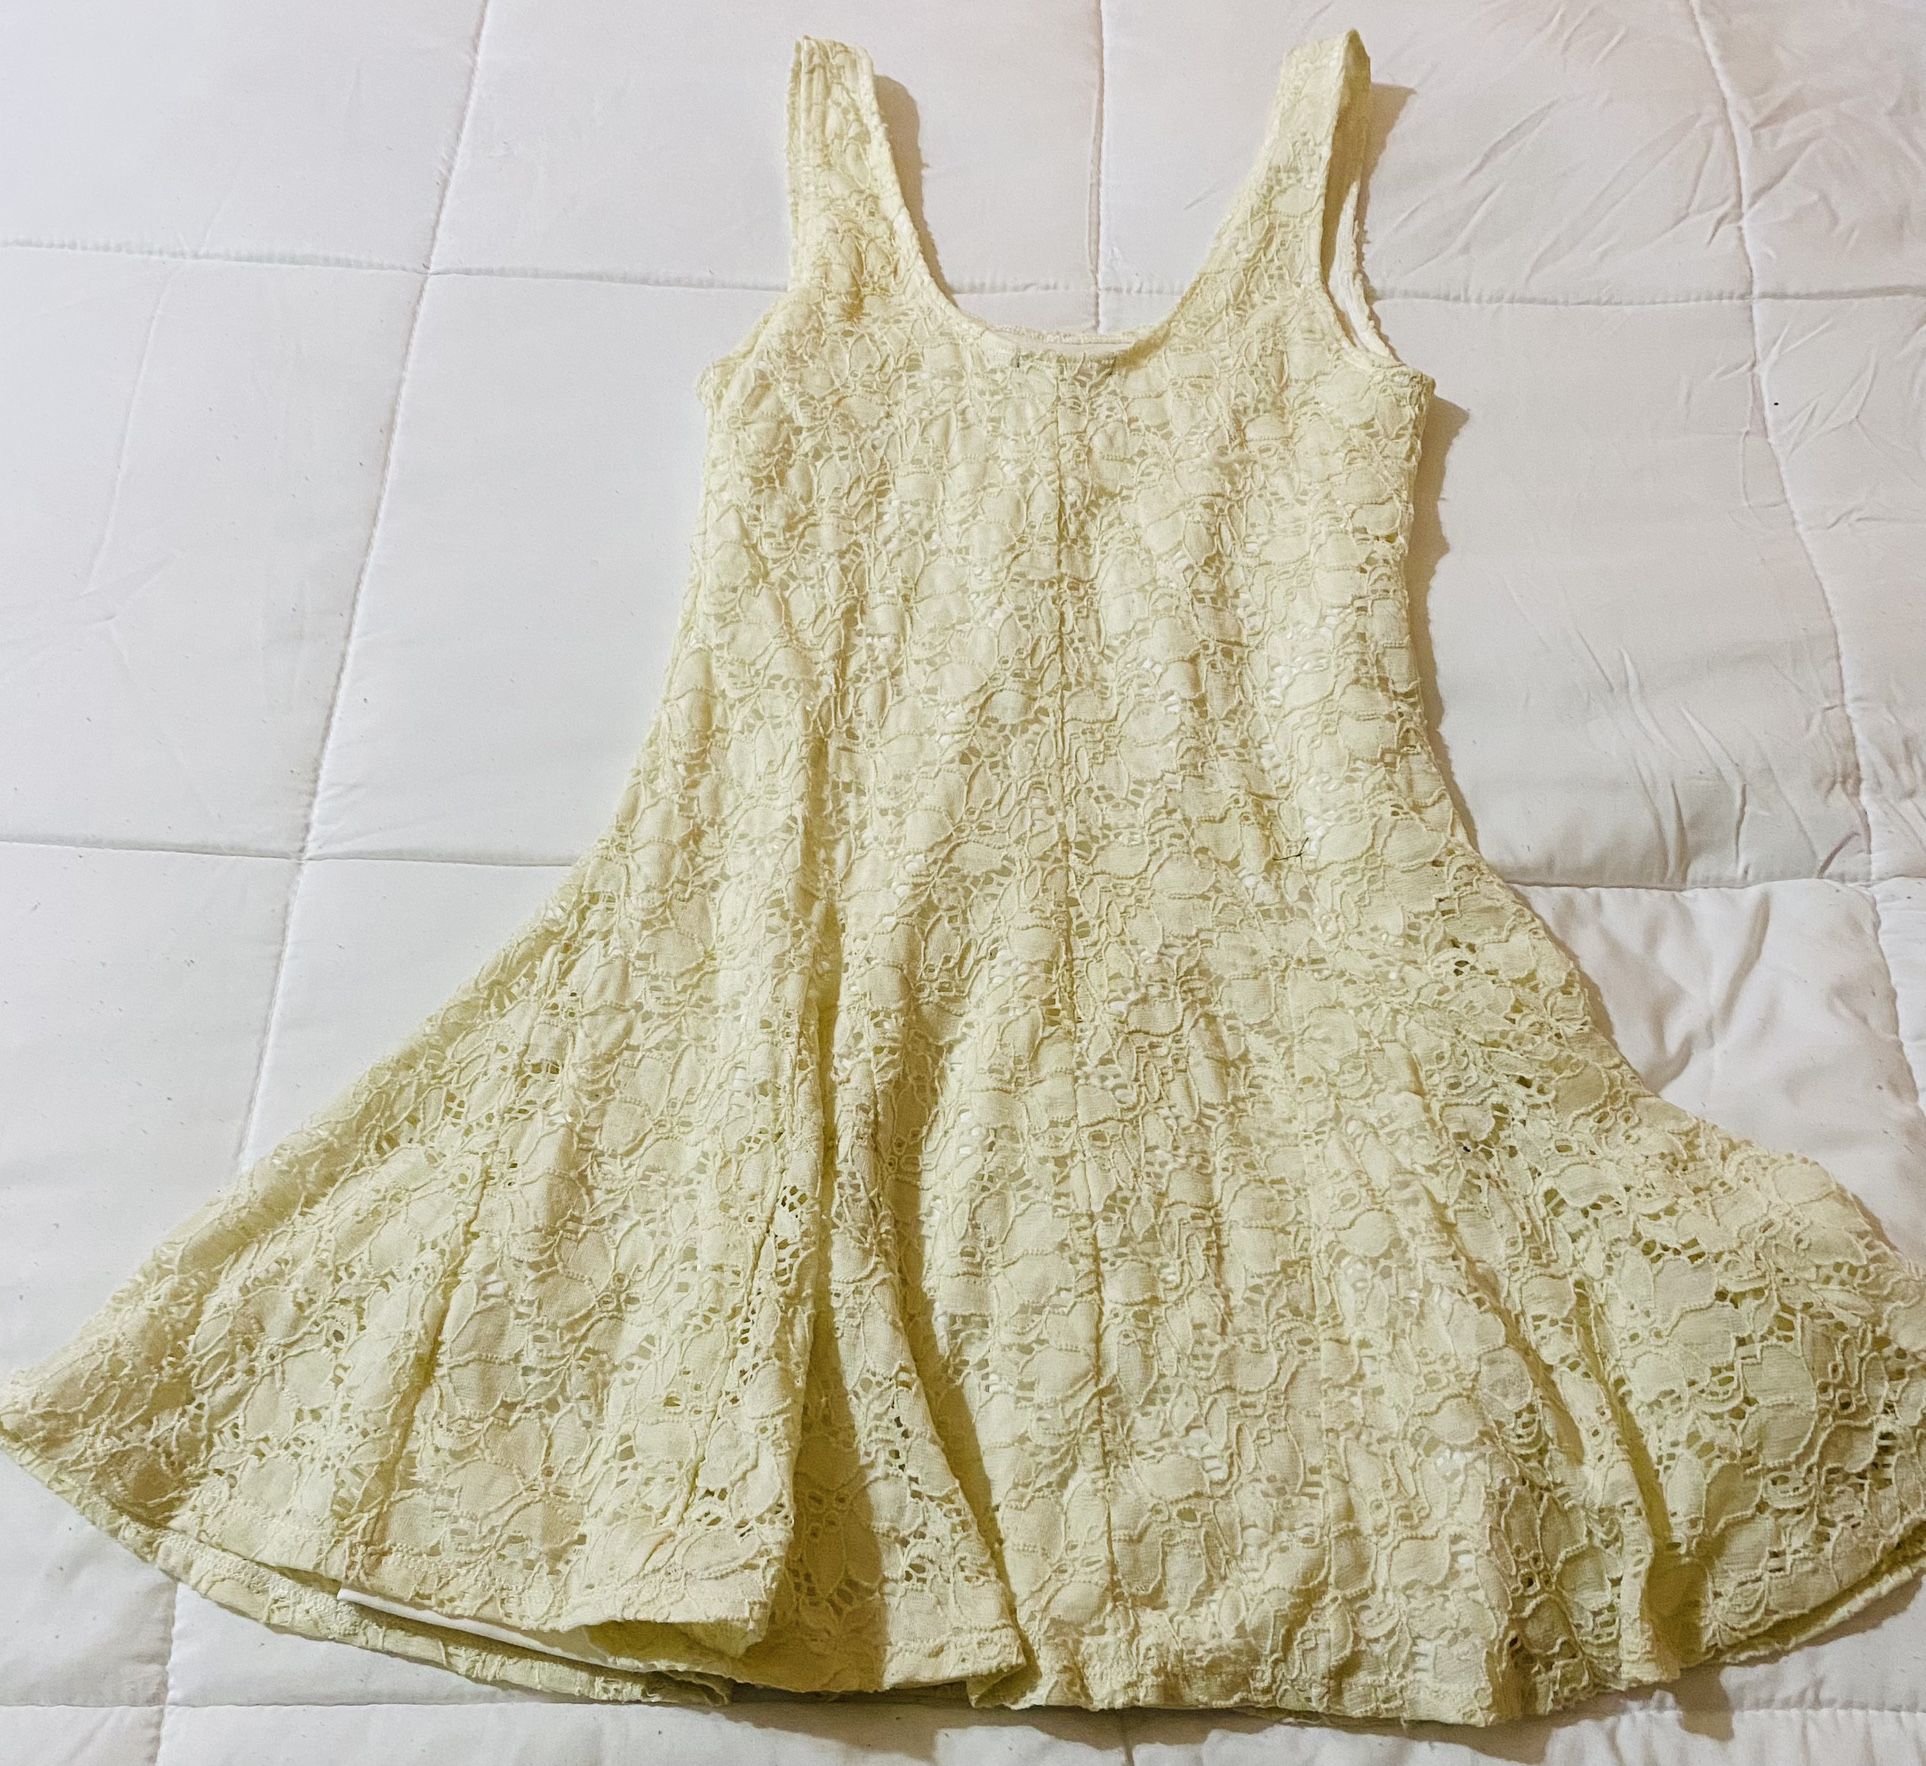 Charlotte Russe Pretty Lace Summer Dress